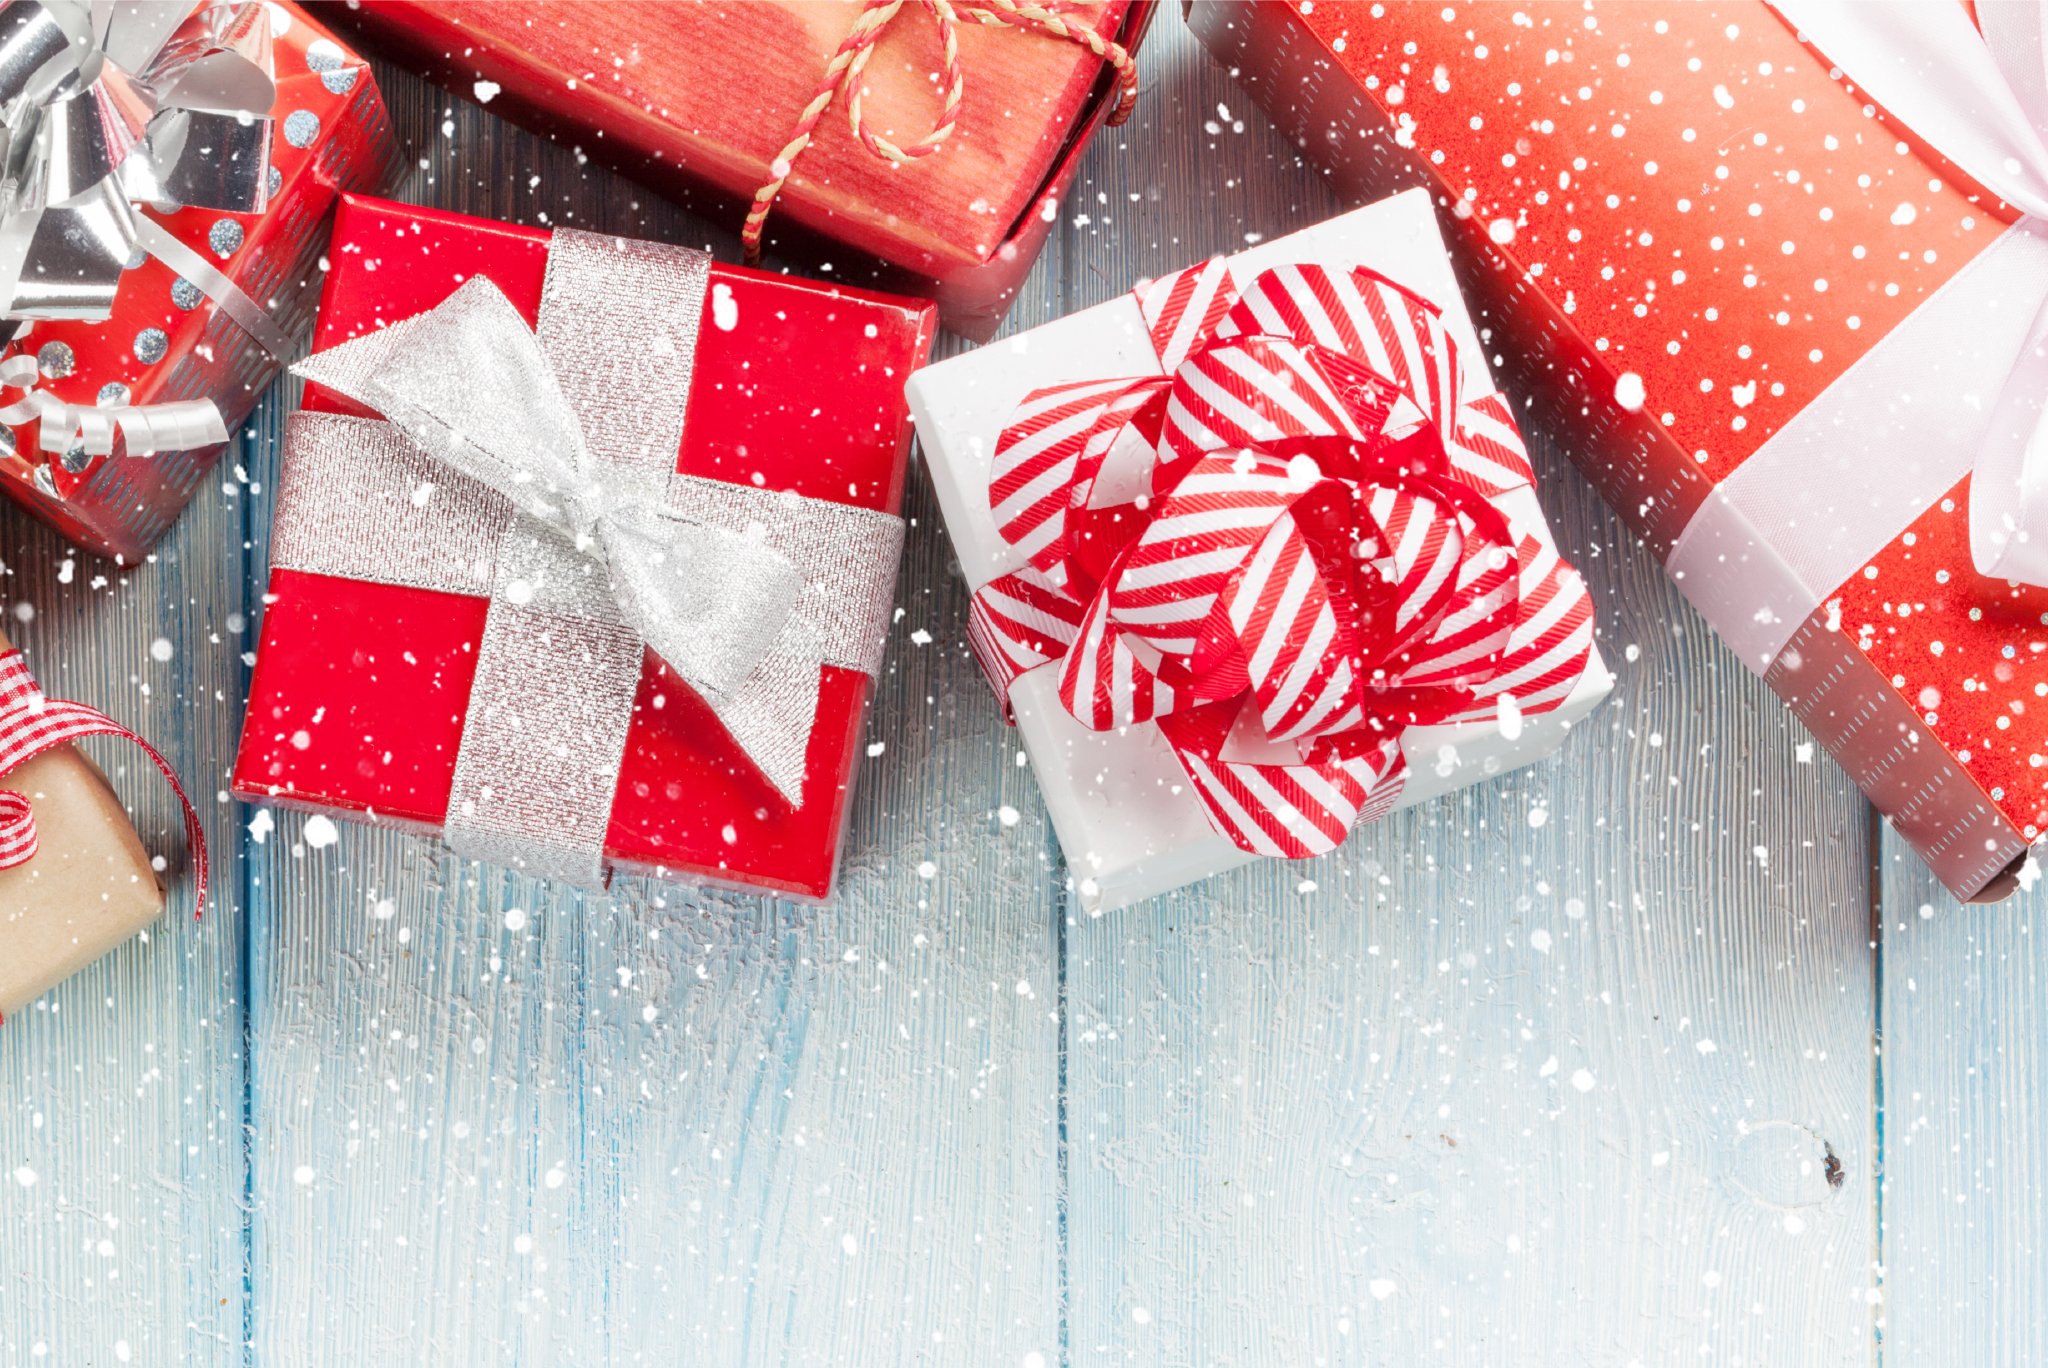 red wrapped presents on a wooden background